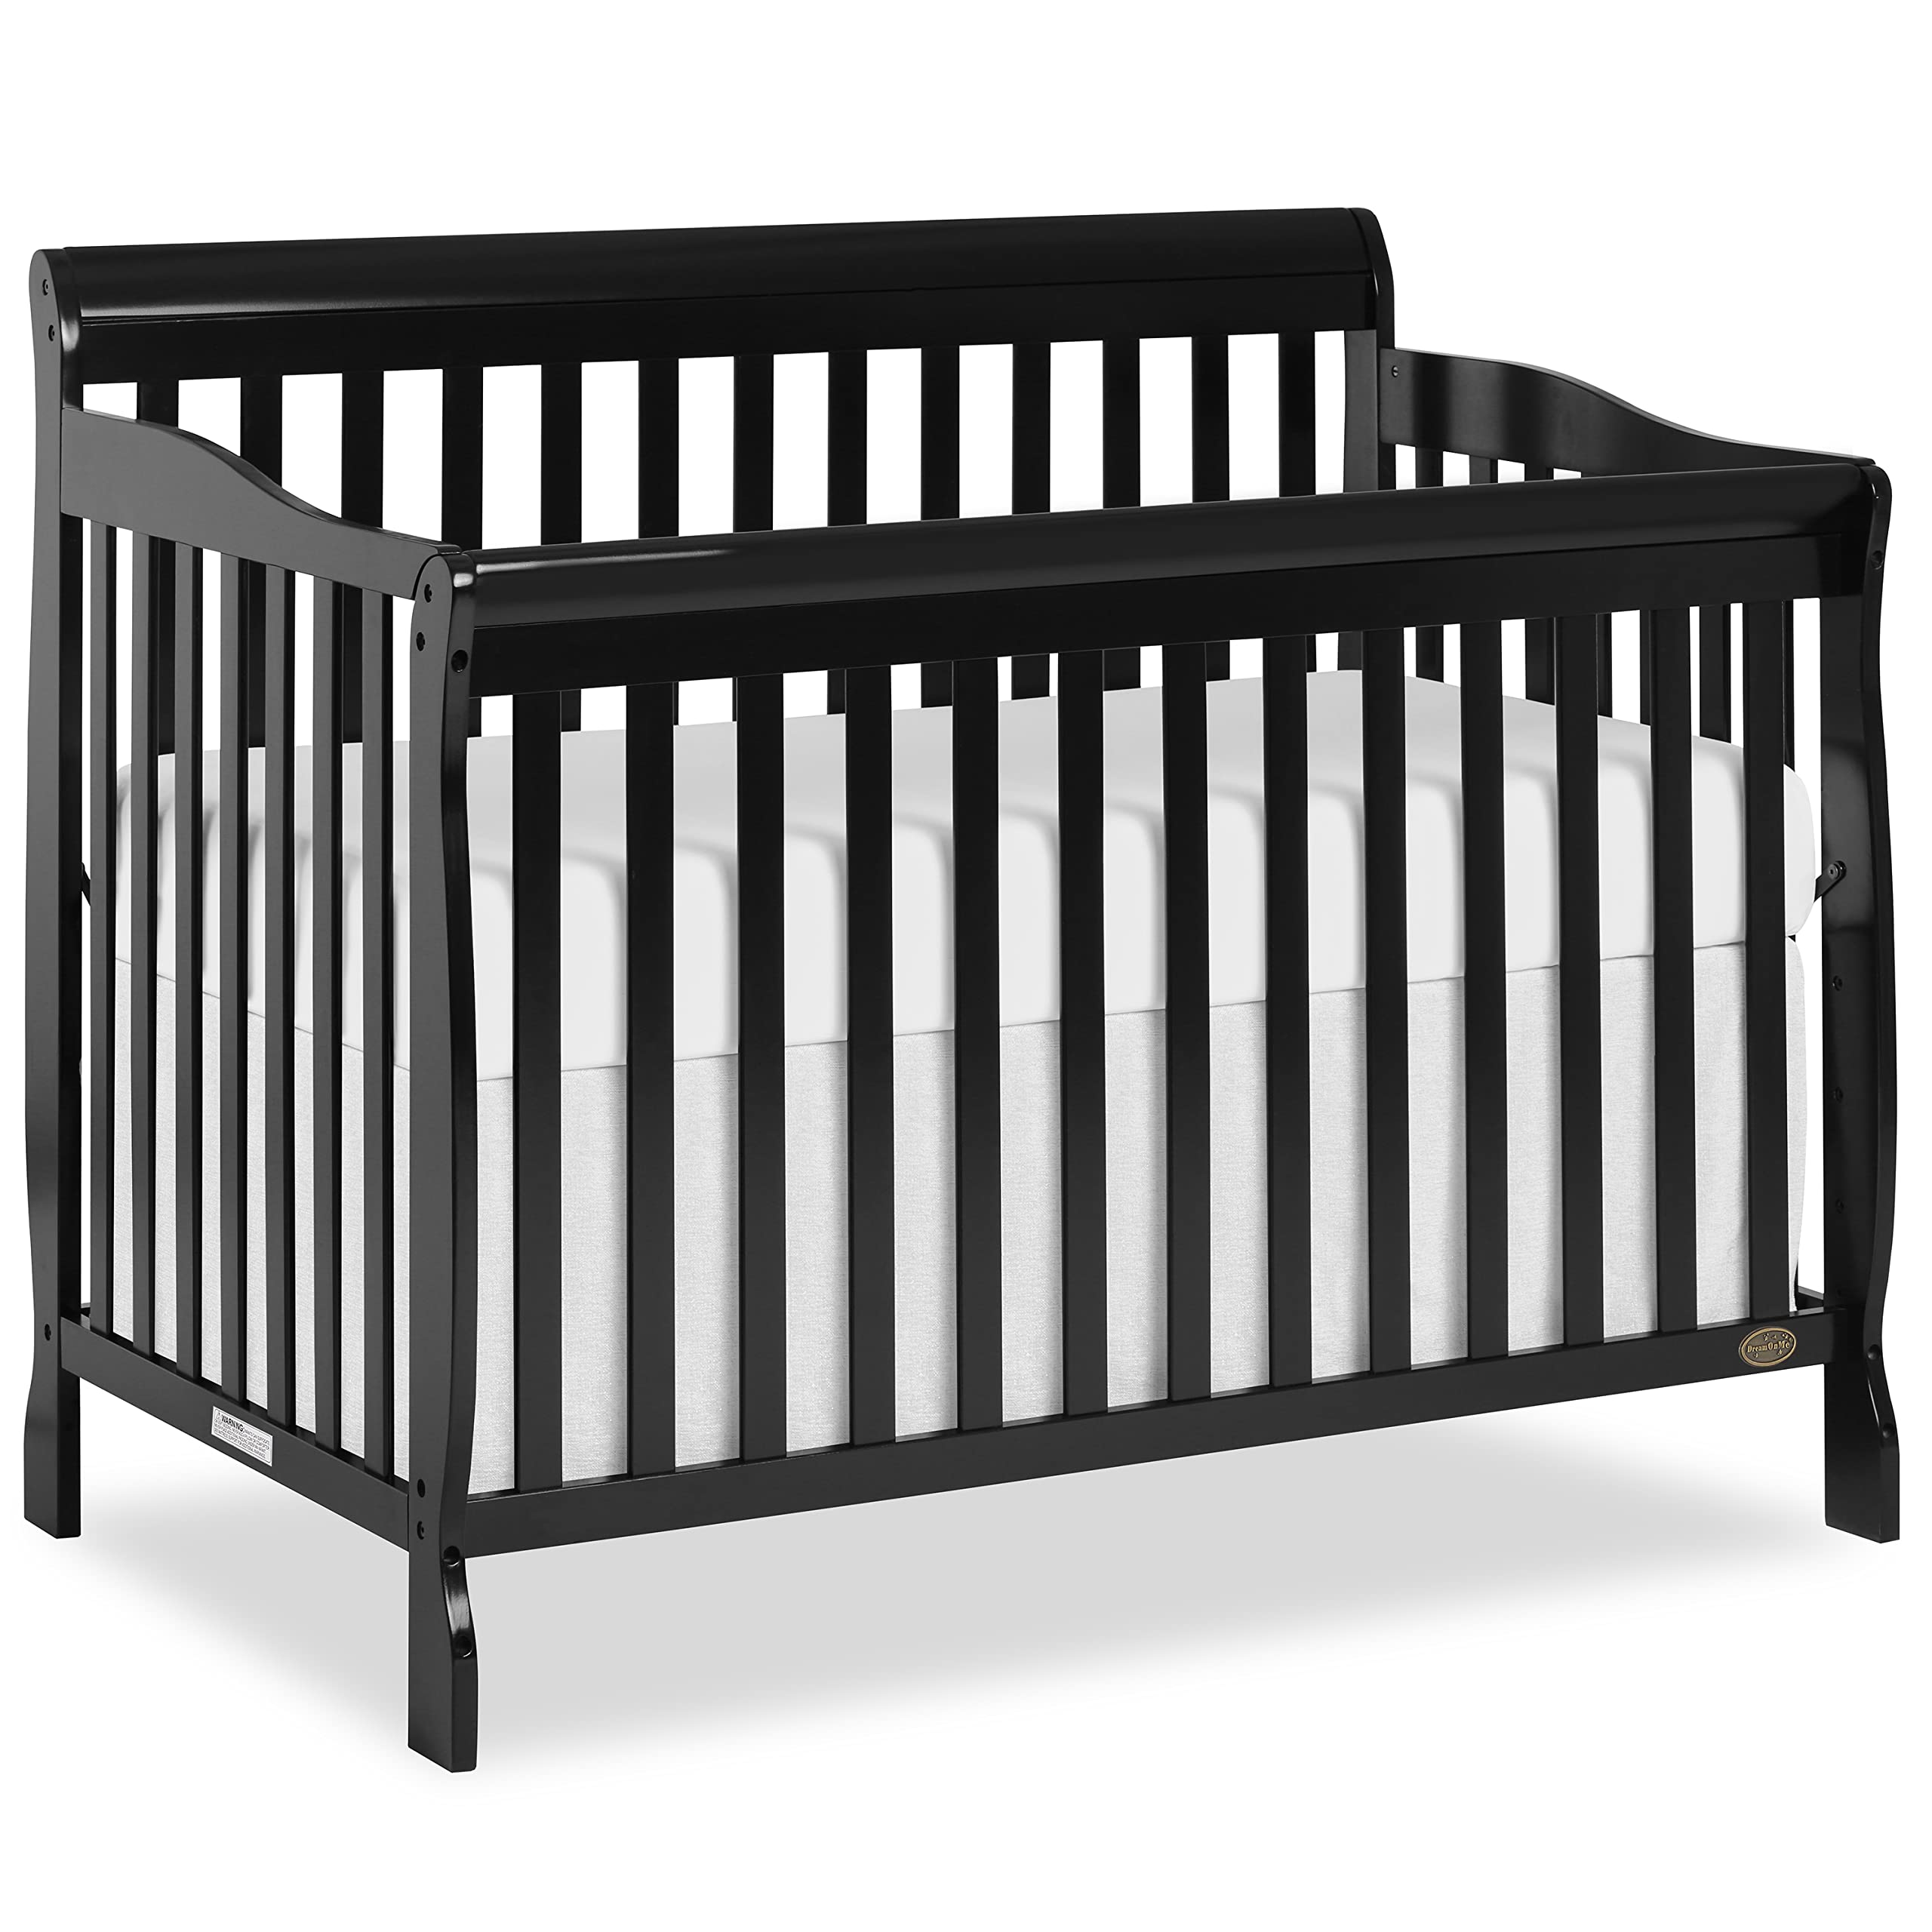 Dream On Me Ashton 5-in-1 Convertible Crib in Black, Greenguard Gold Certified , 50x36x44 Inch (Pack of 1)